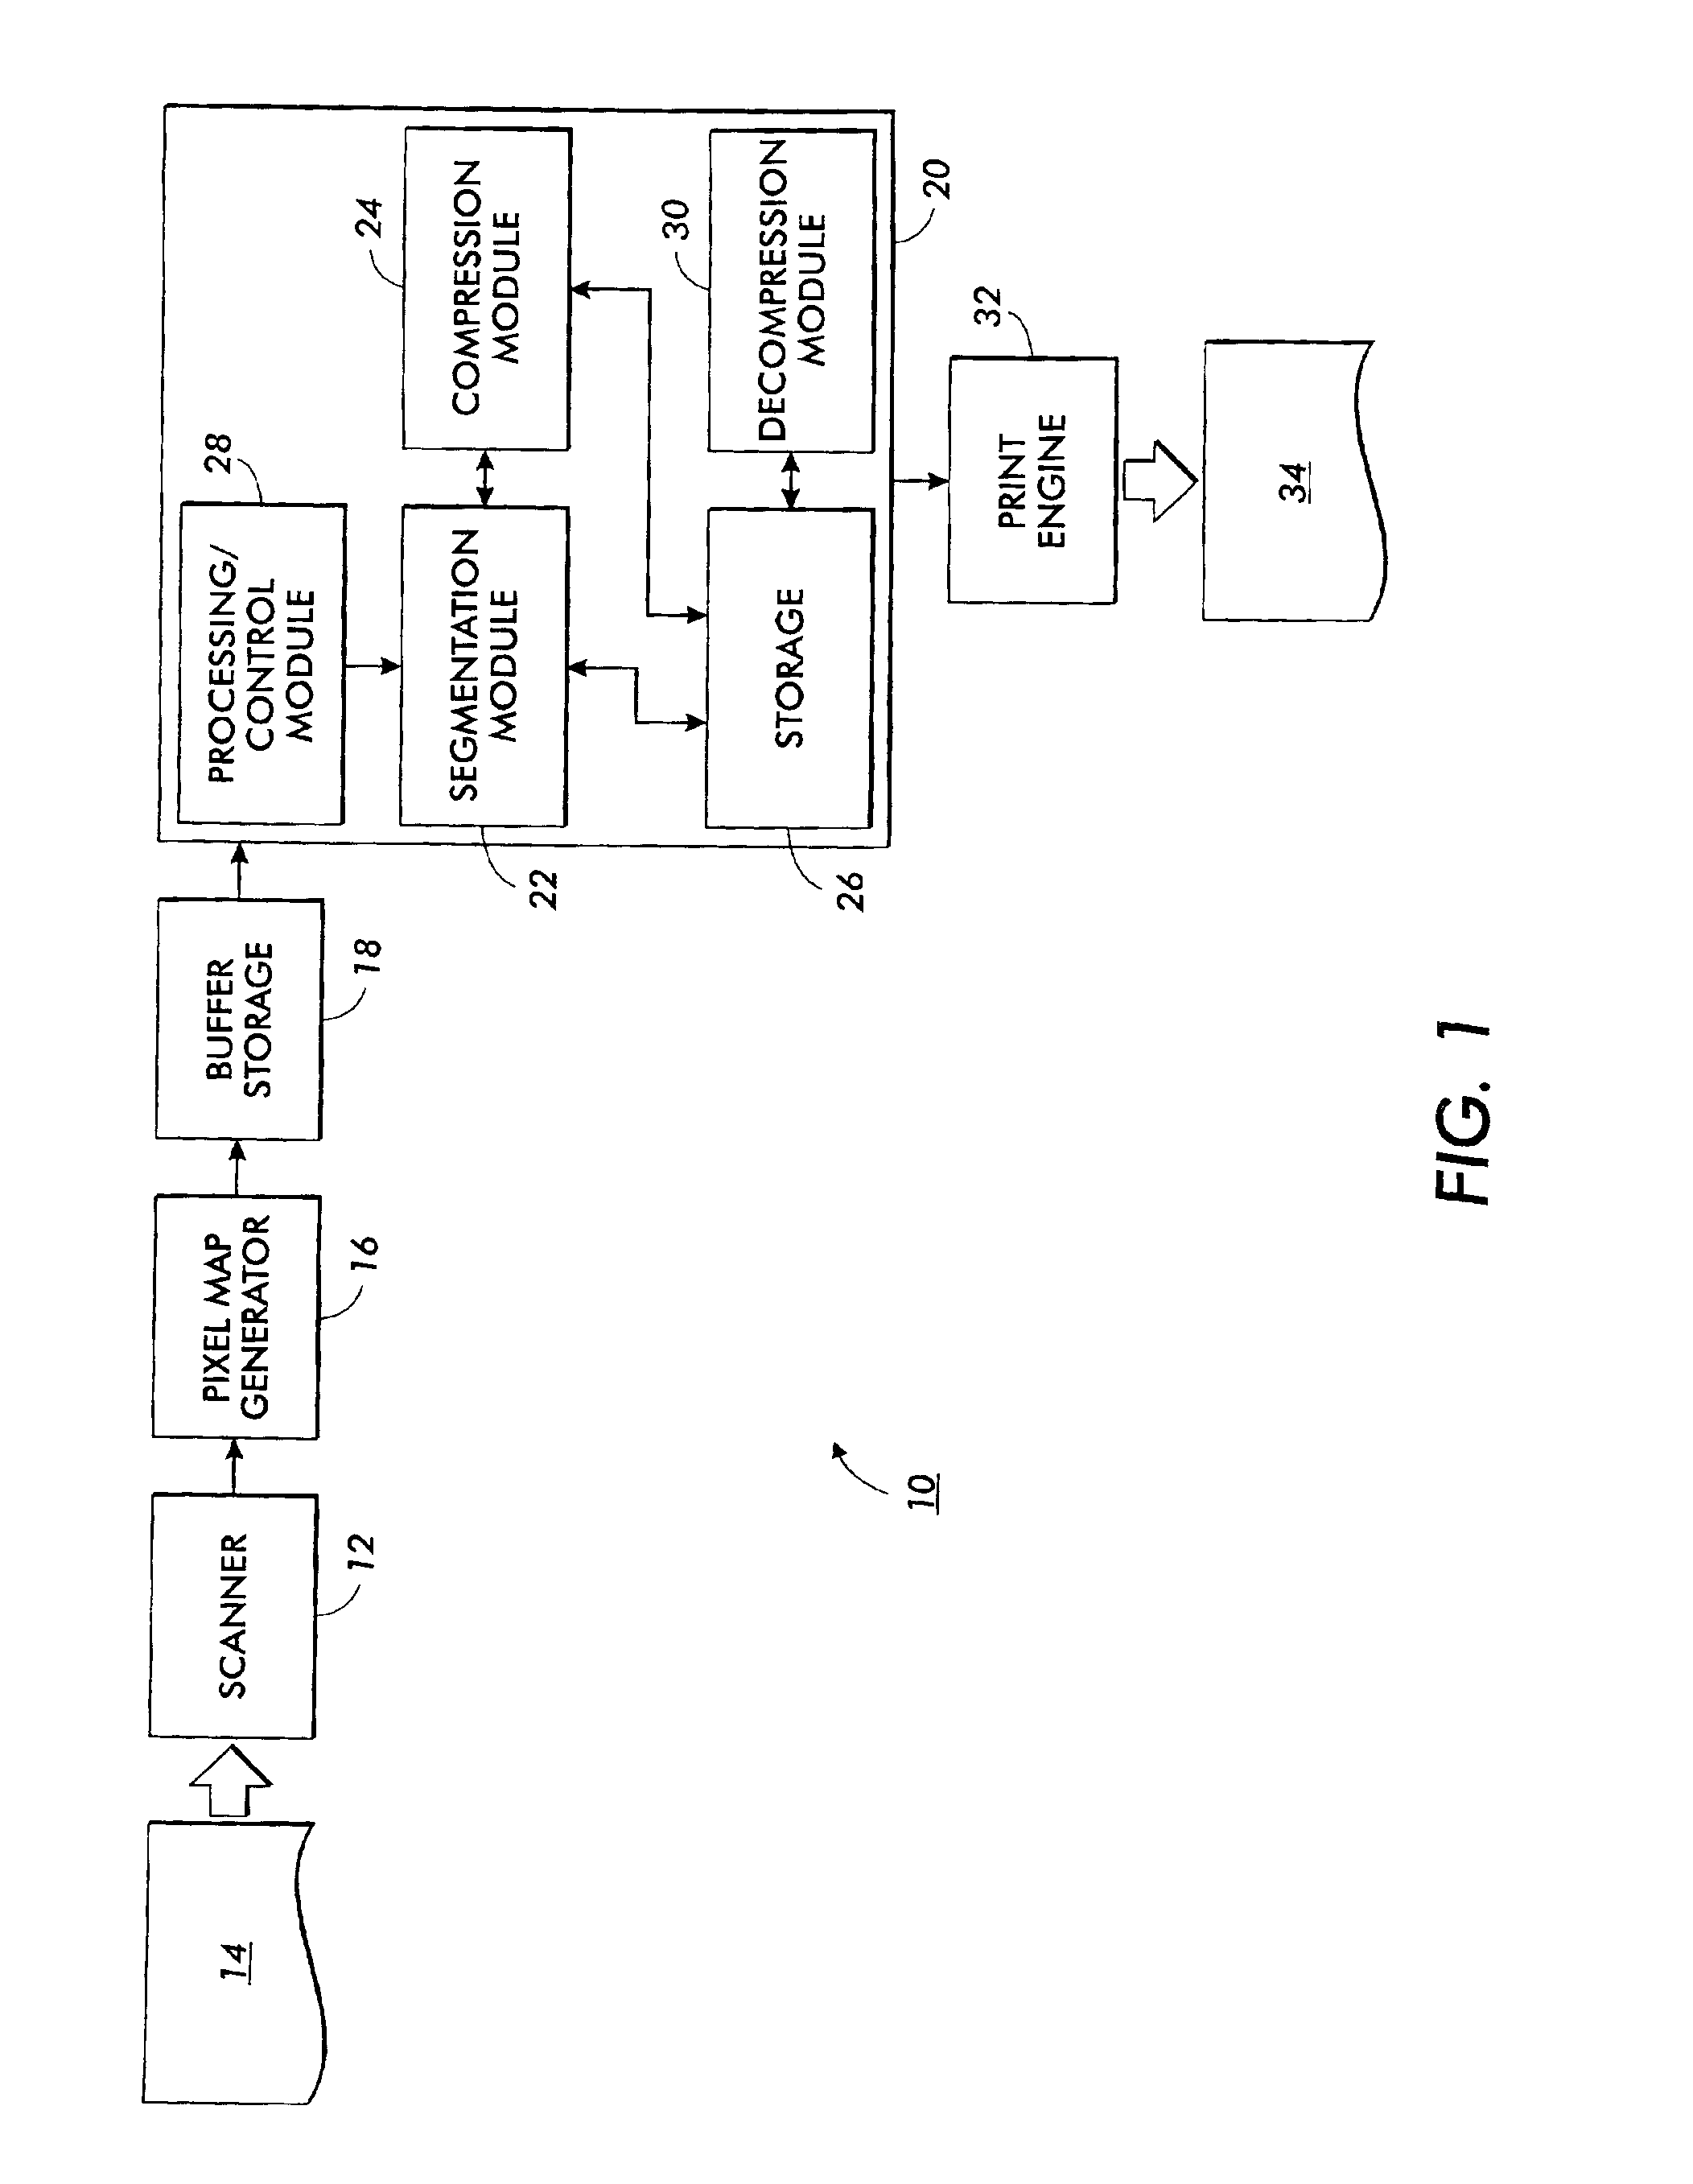 Method and apparatus for segmenting an image using a combination of image segmentation techniques